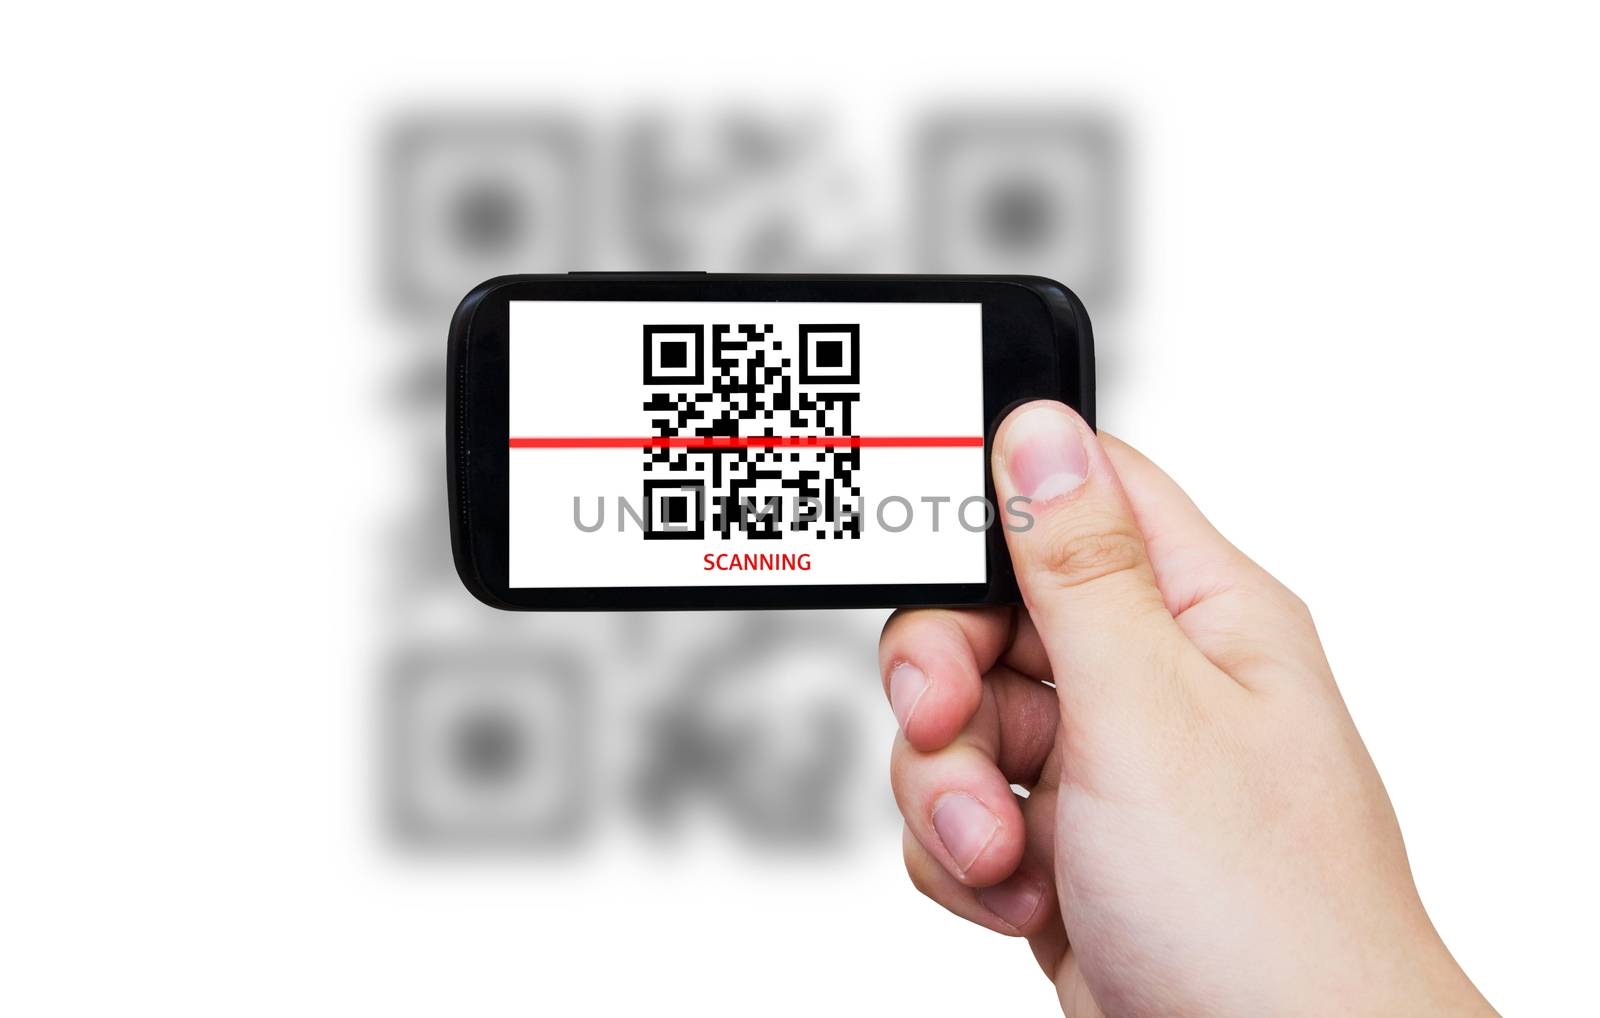 Smartphone scanning QR code by simpson33